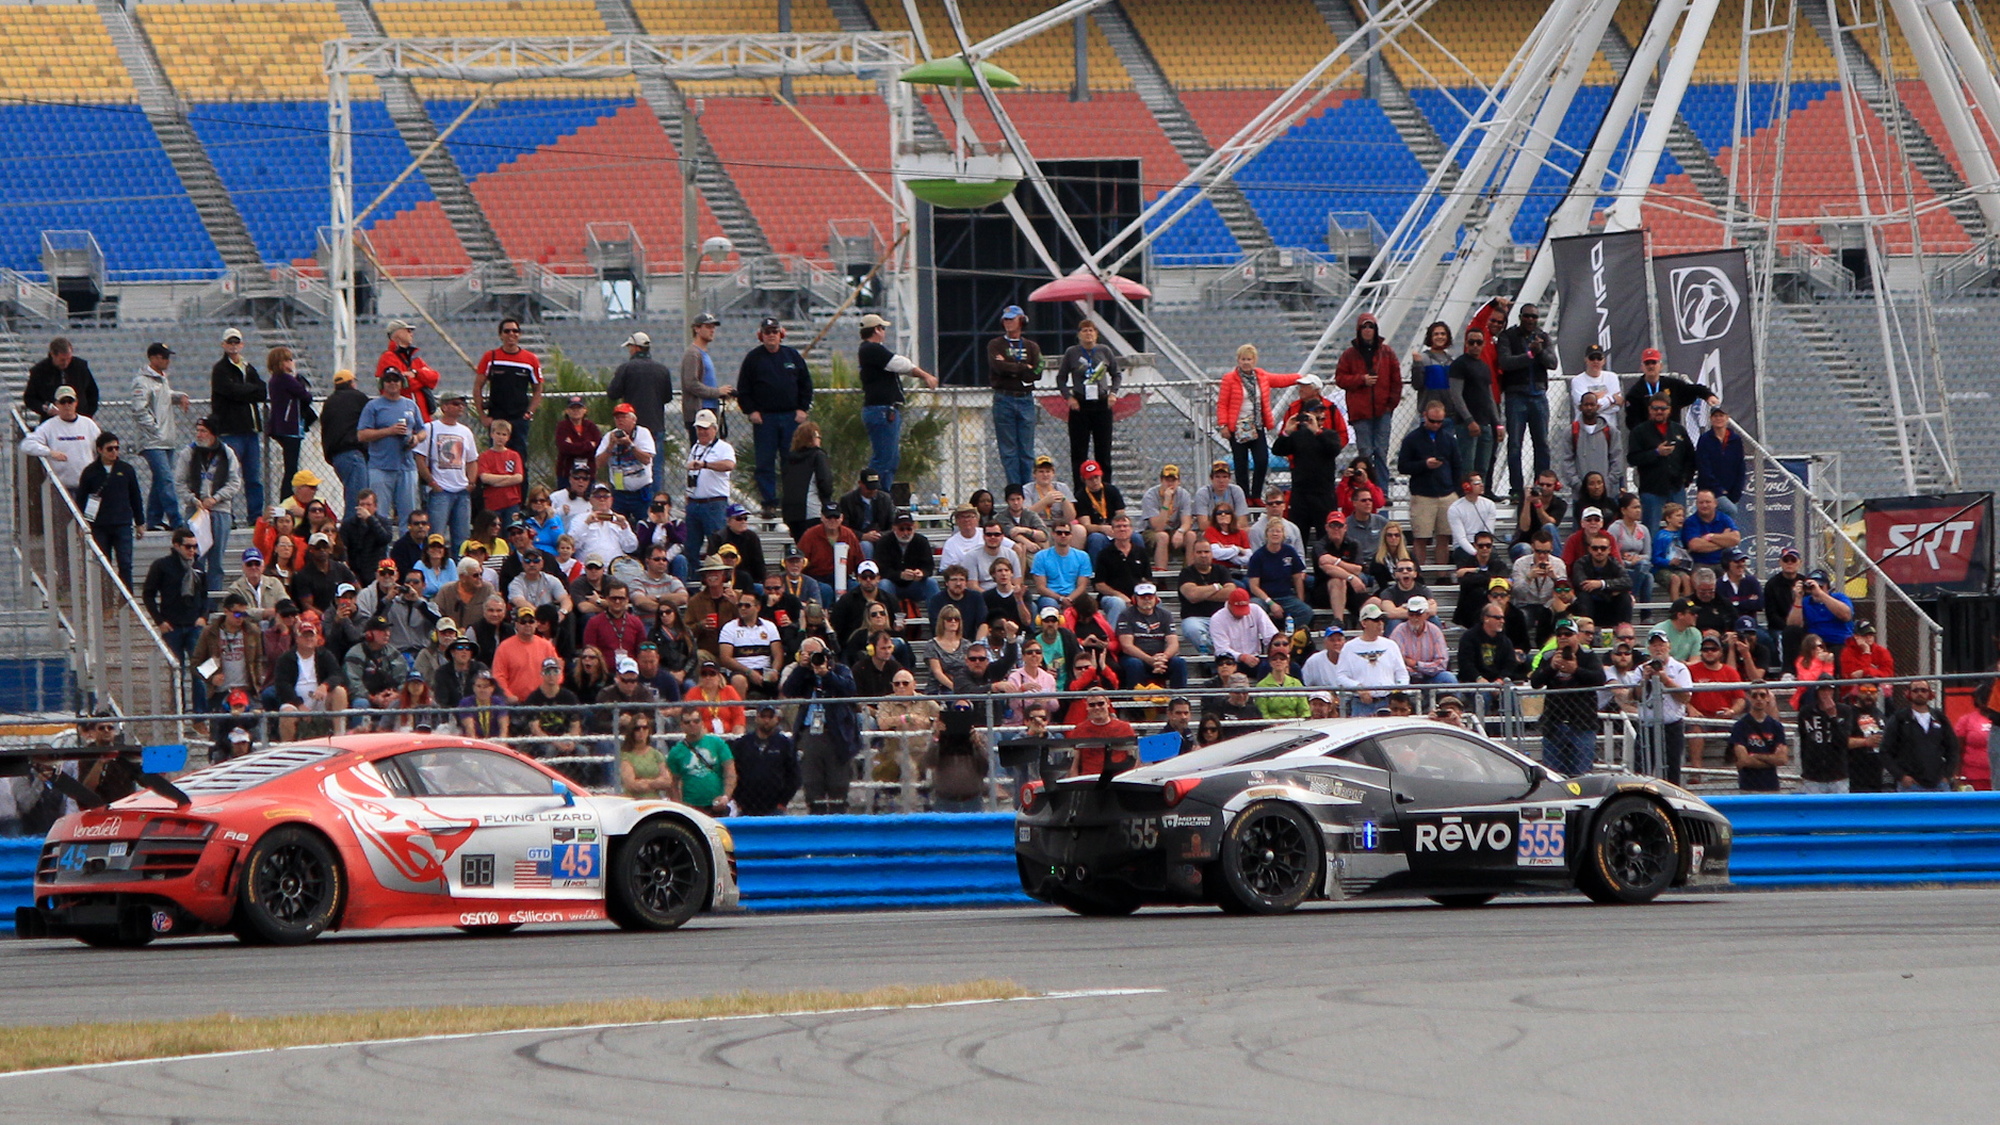 Winkelhock an Guidi battle for position at the end of the 2014 Rolex 24 at Daytona